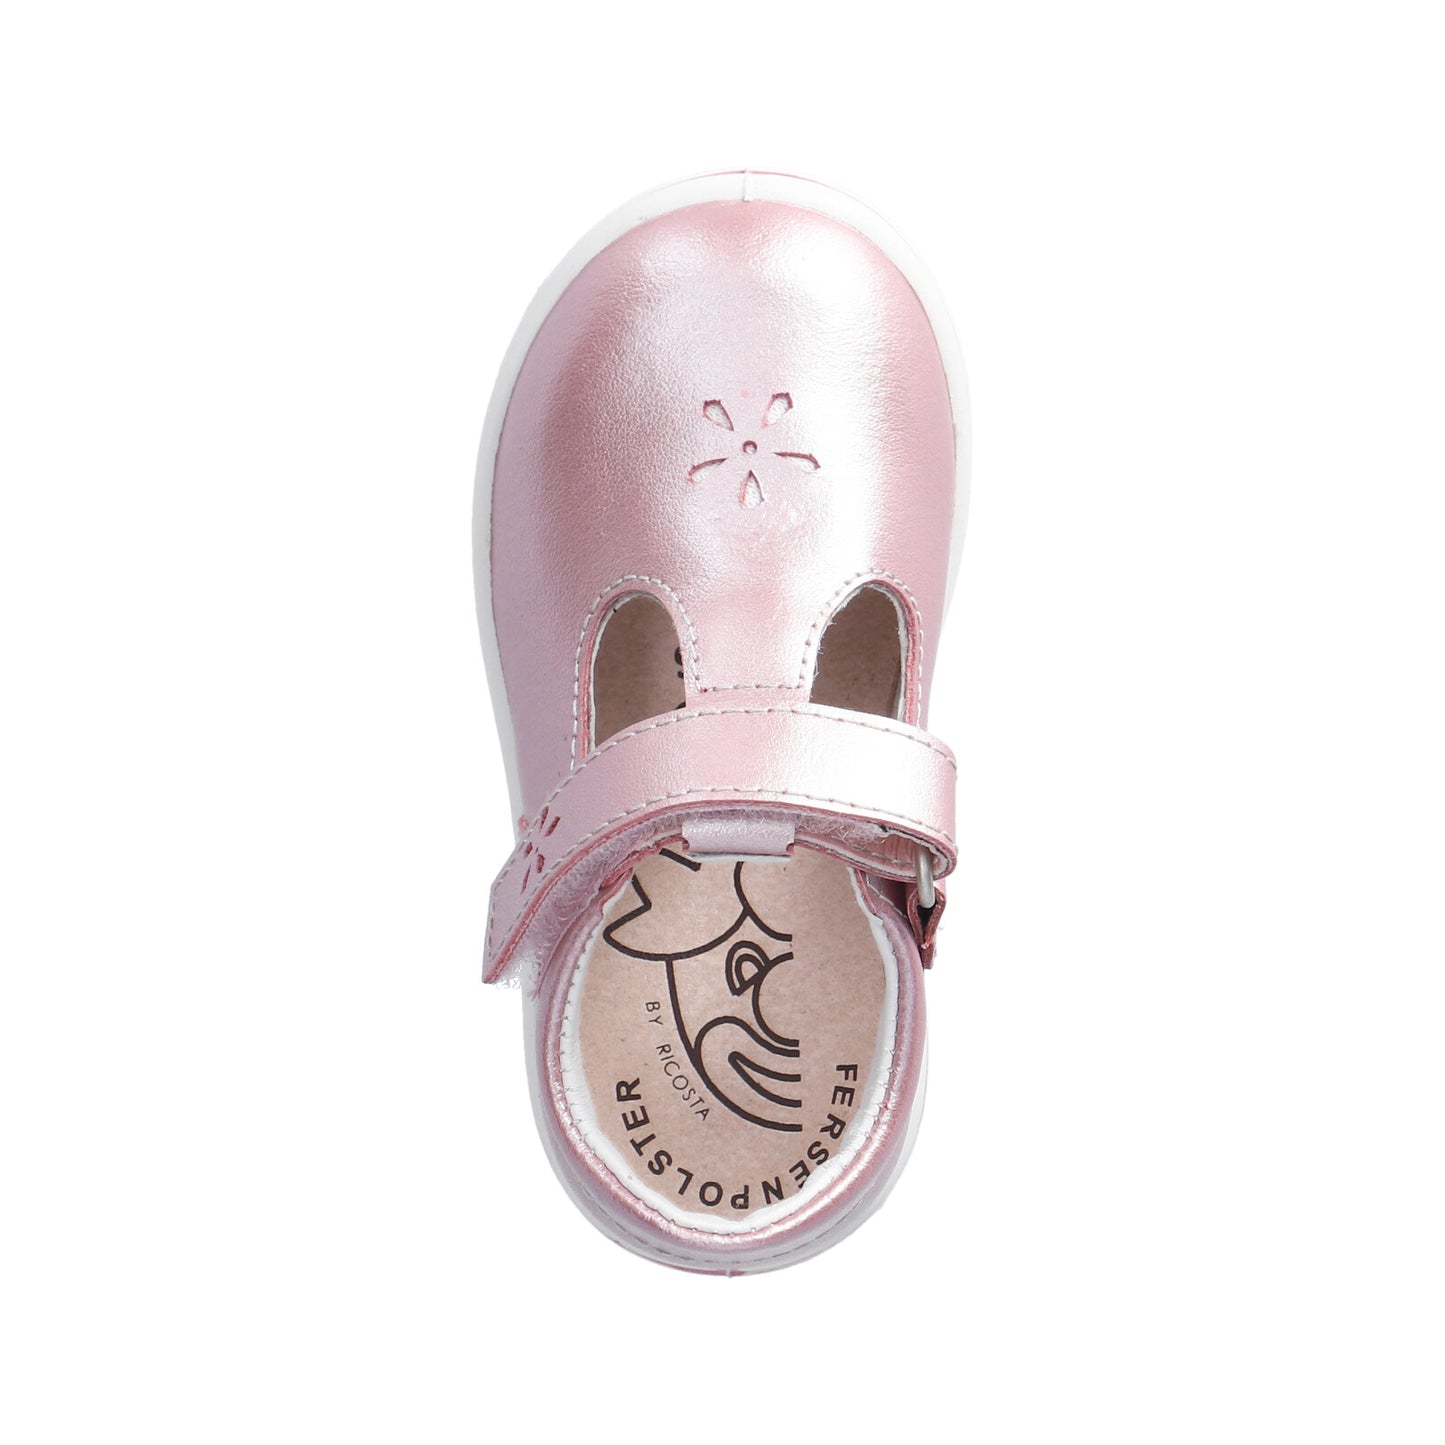 Winona Girl's T-Bar Shoe in Pearl Pink